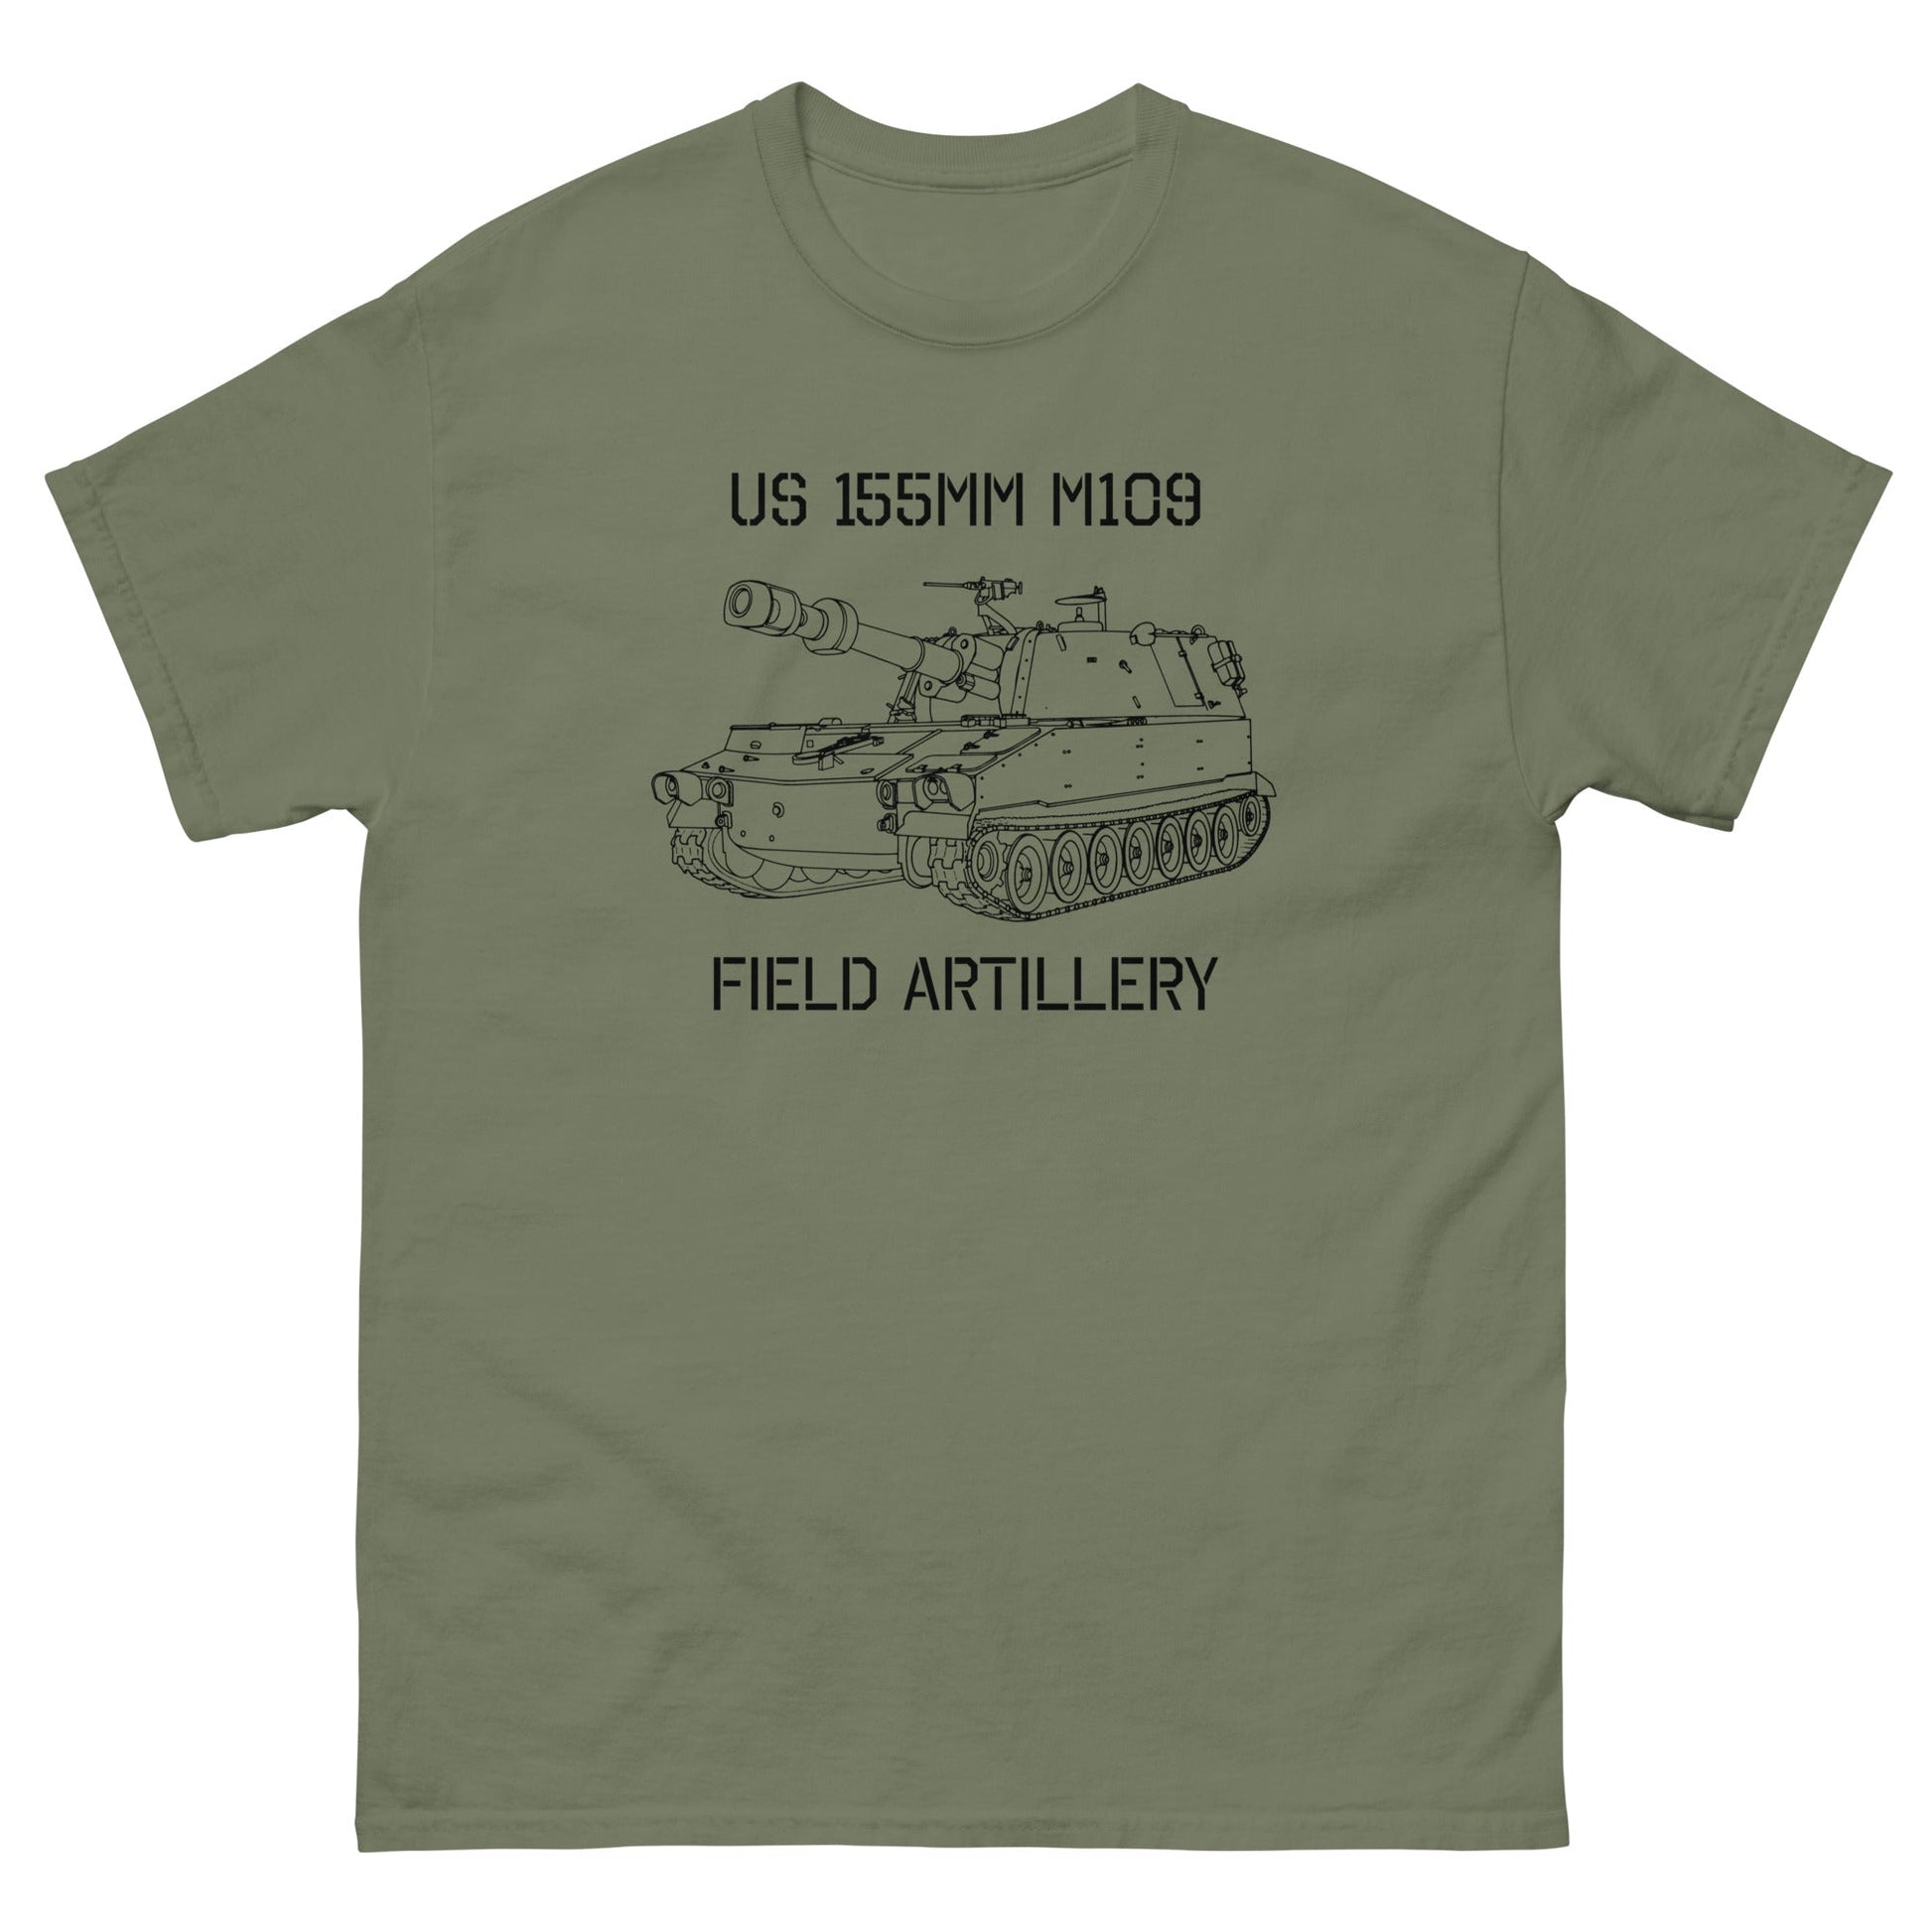 M109 Field Artillery Military T Shirt Olive Drab - Rotherhams